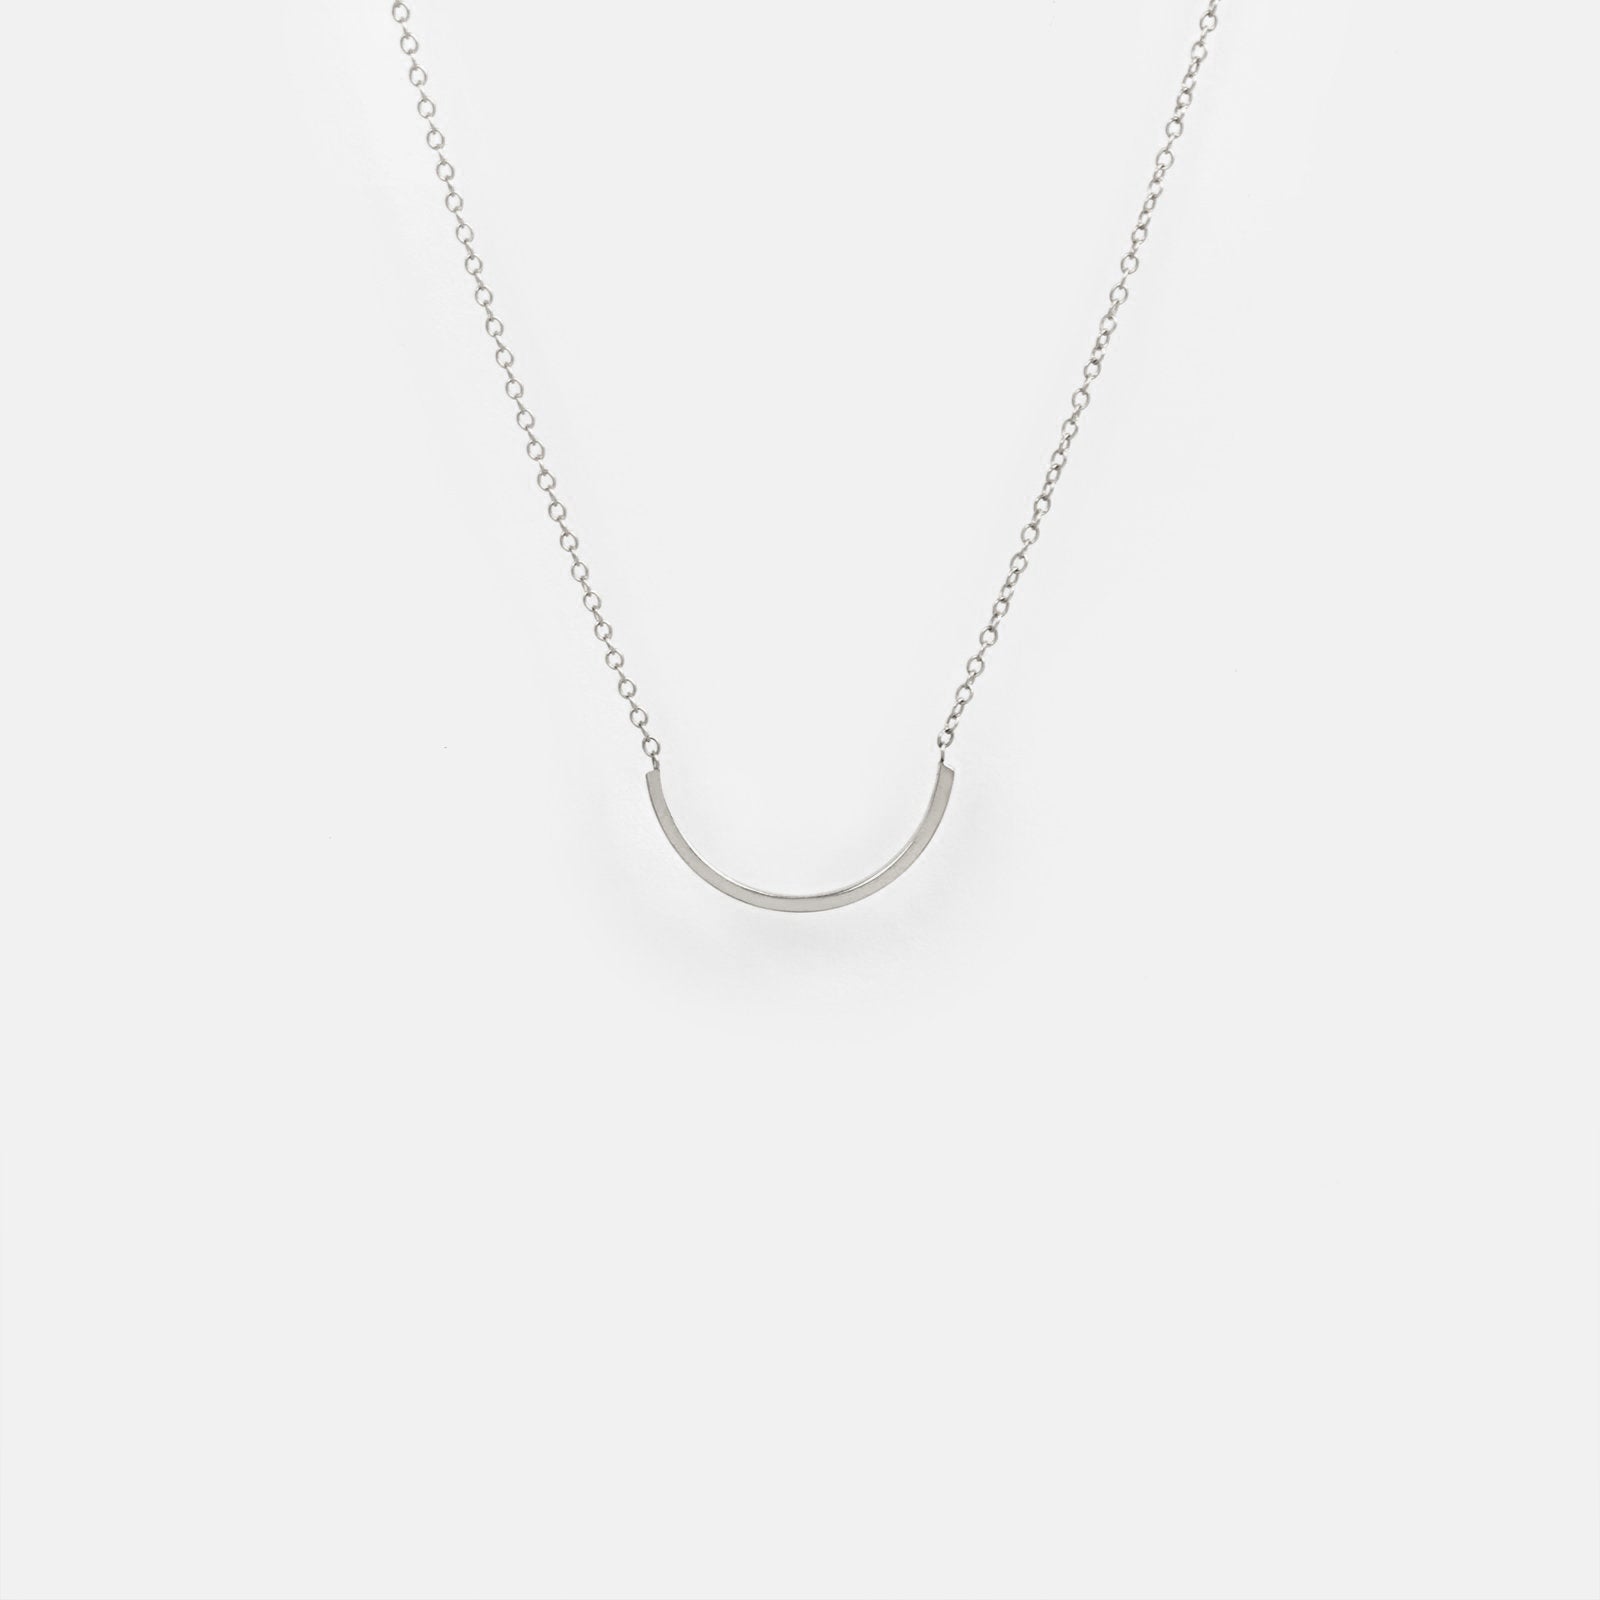 Uva Cool Necklace in 14k White Gold By SHW Fine Jewelry NYC